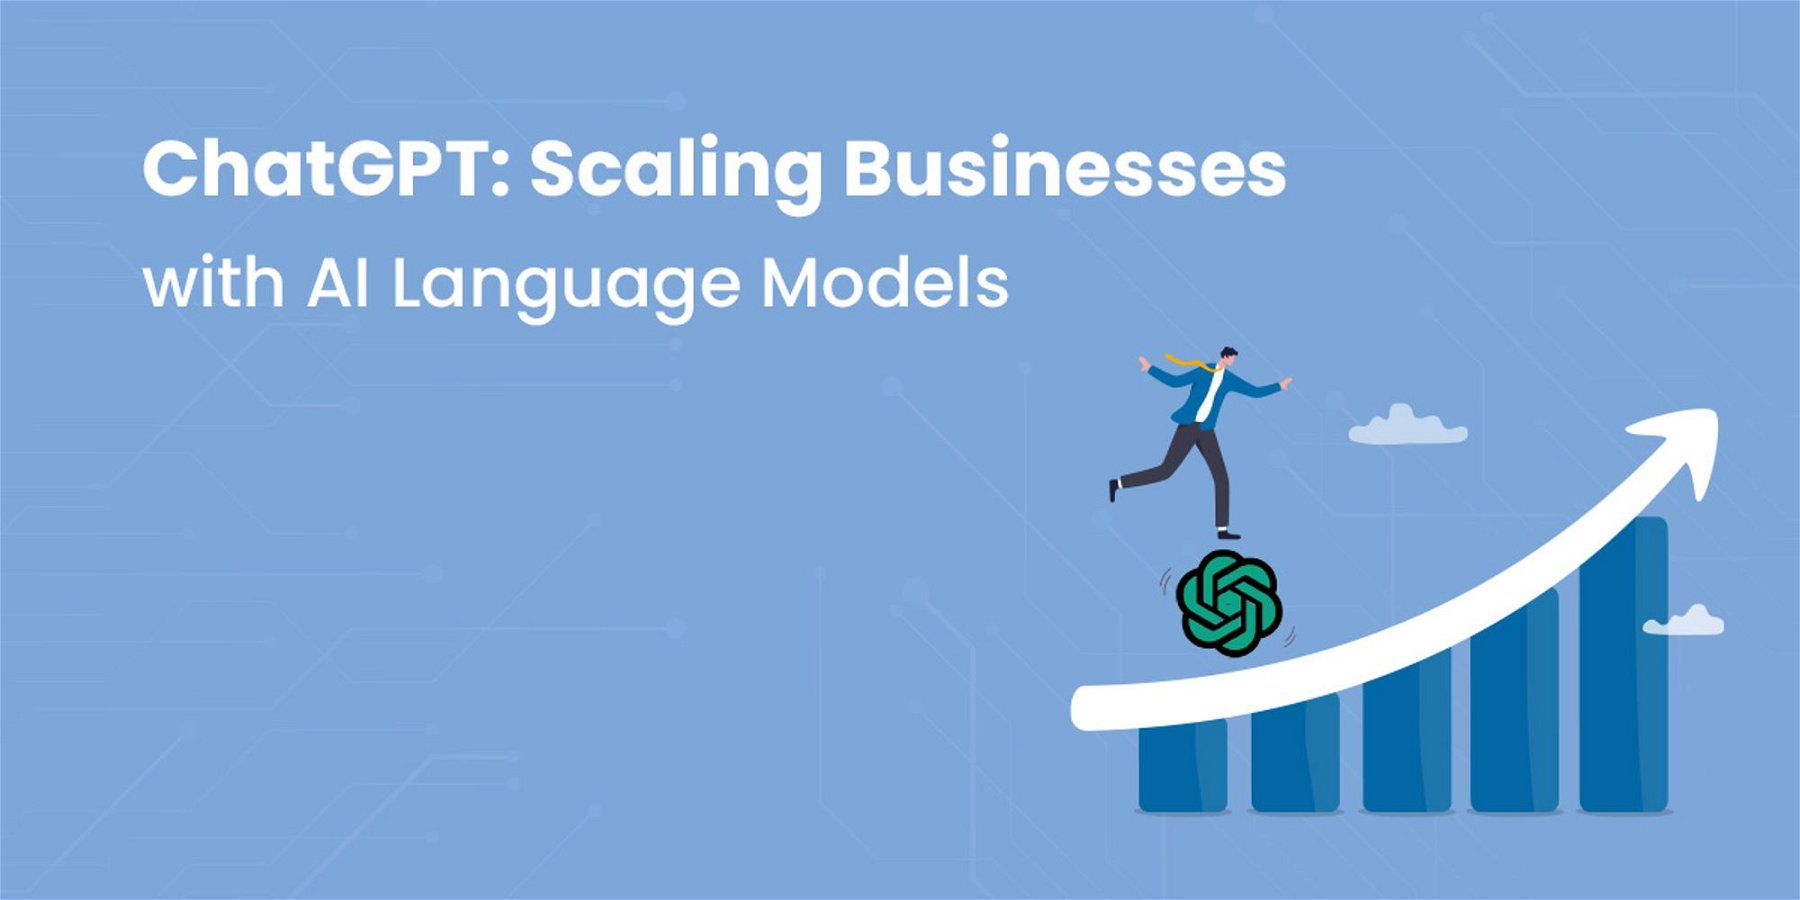 ChatGPT: Scaling Businesses with AI Language Models